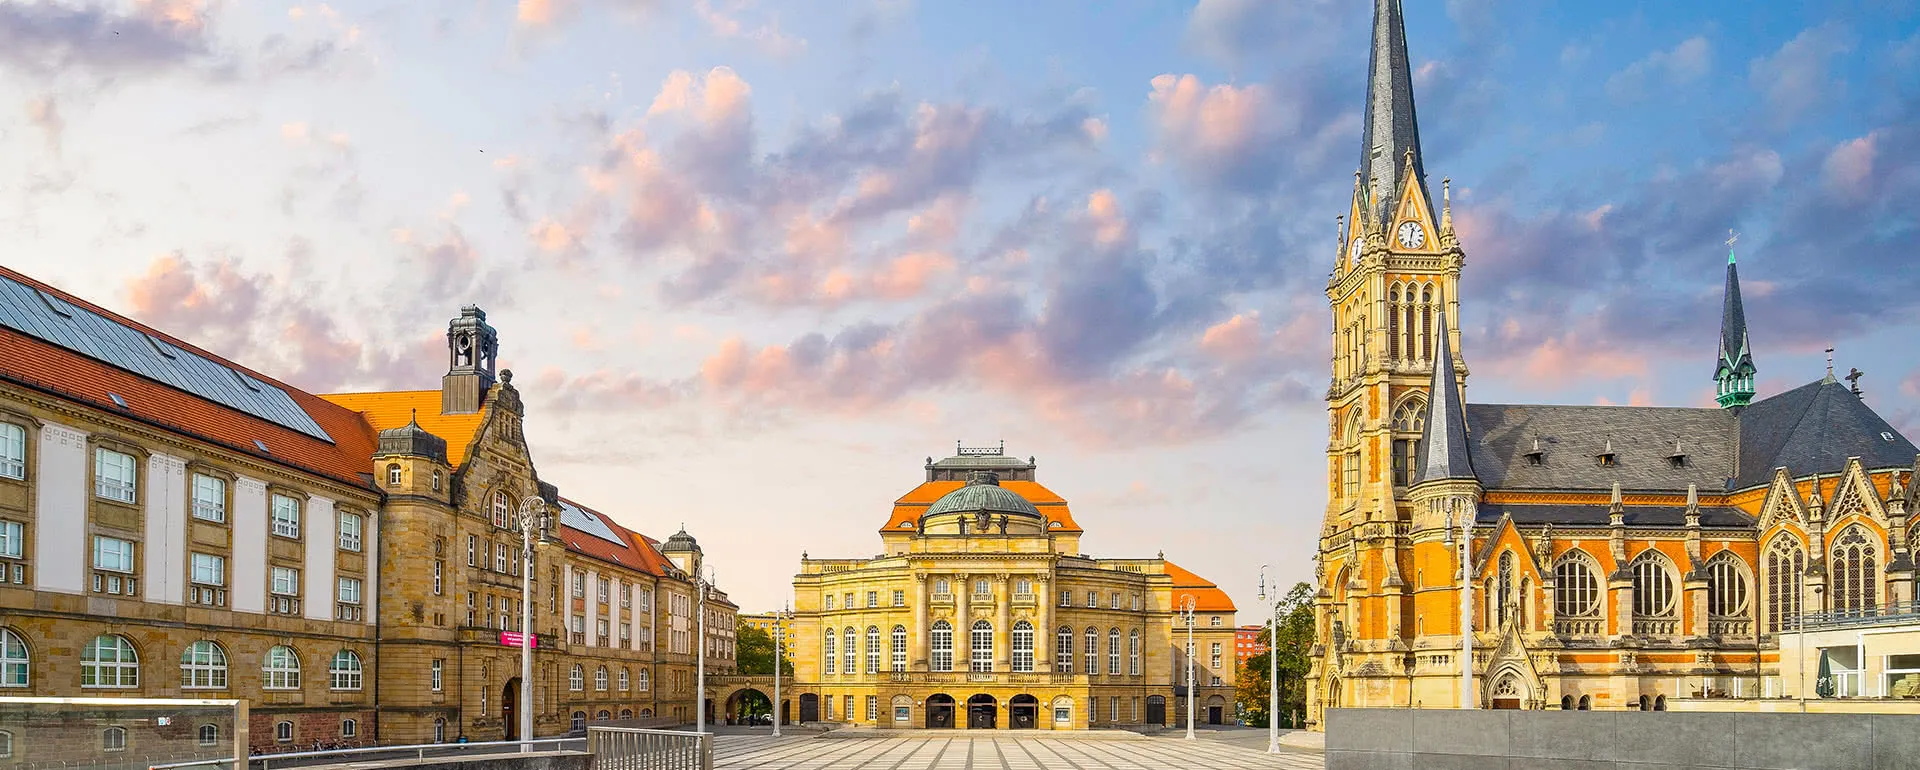 Chemnitz - the destination for group trips